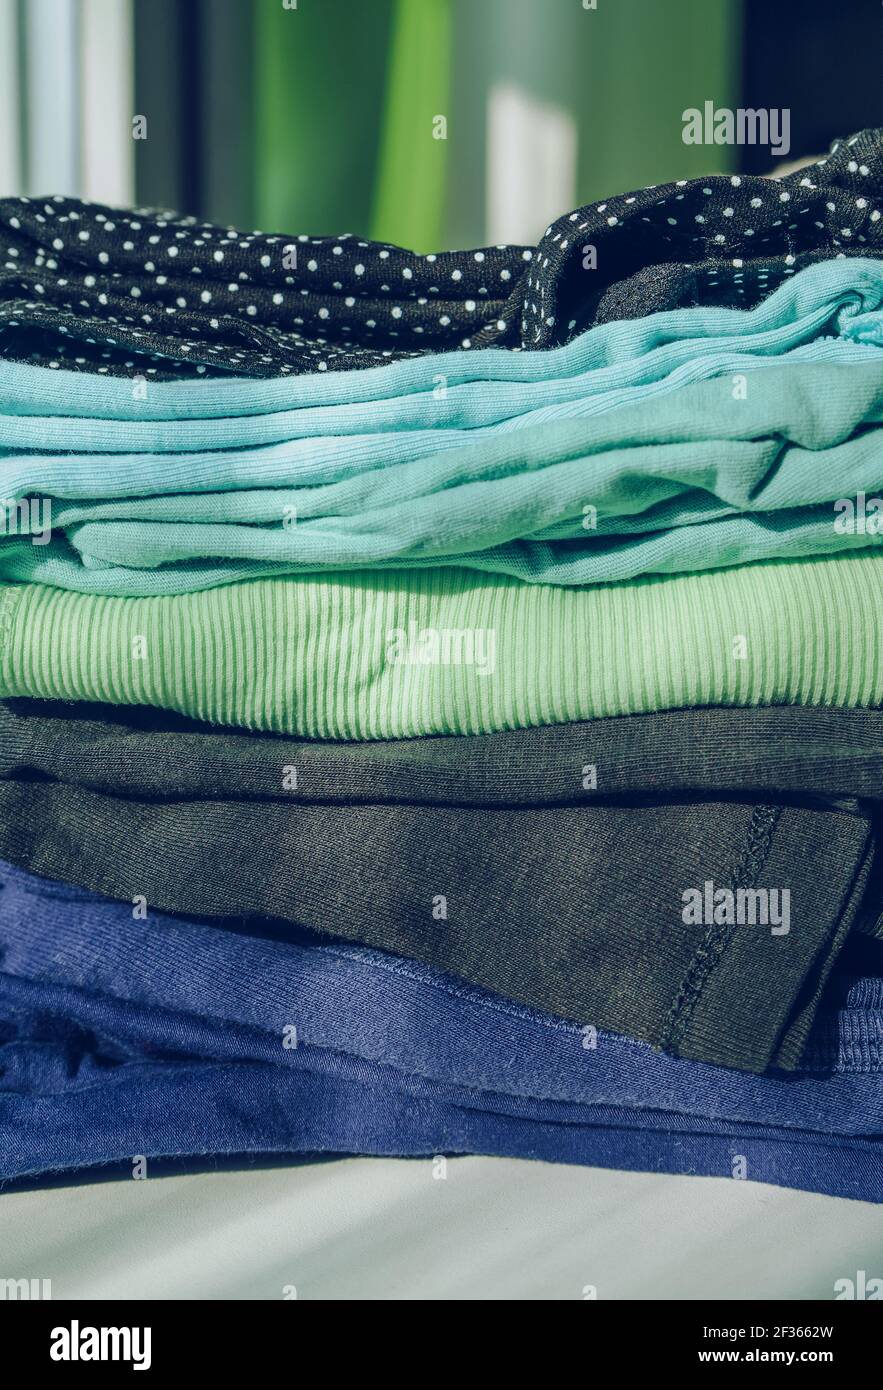 stack of folded colorful woman's tops Stock Photo